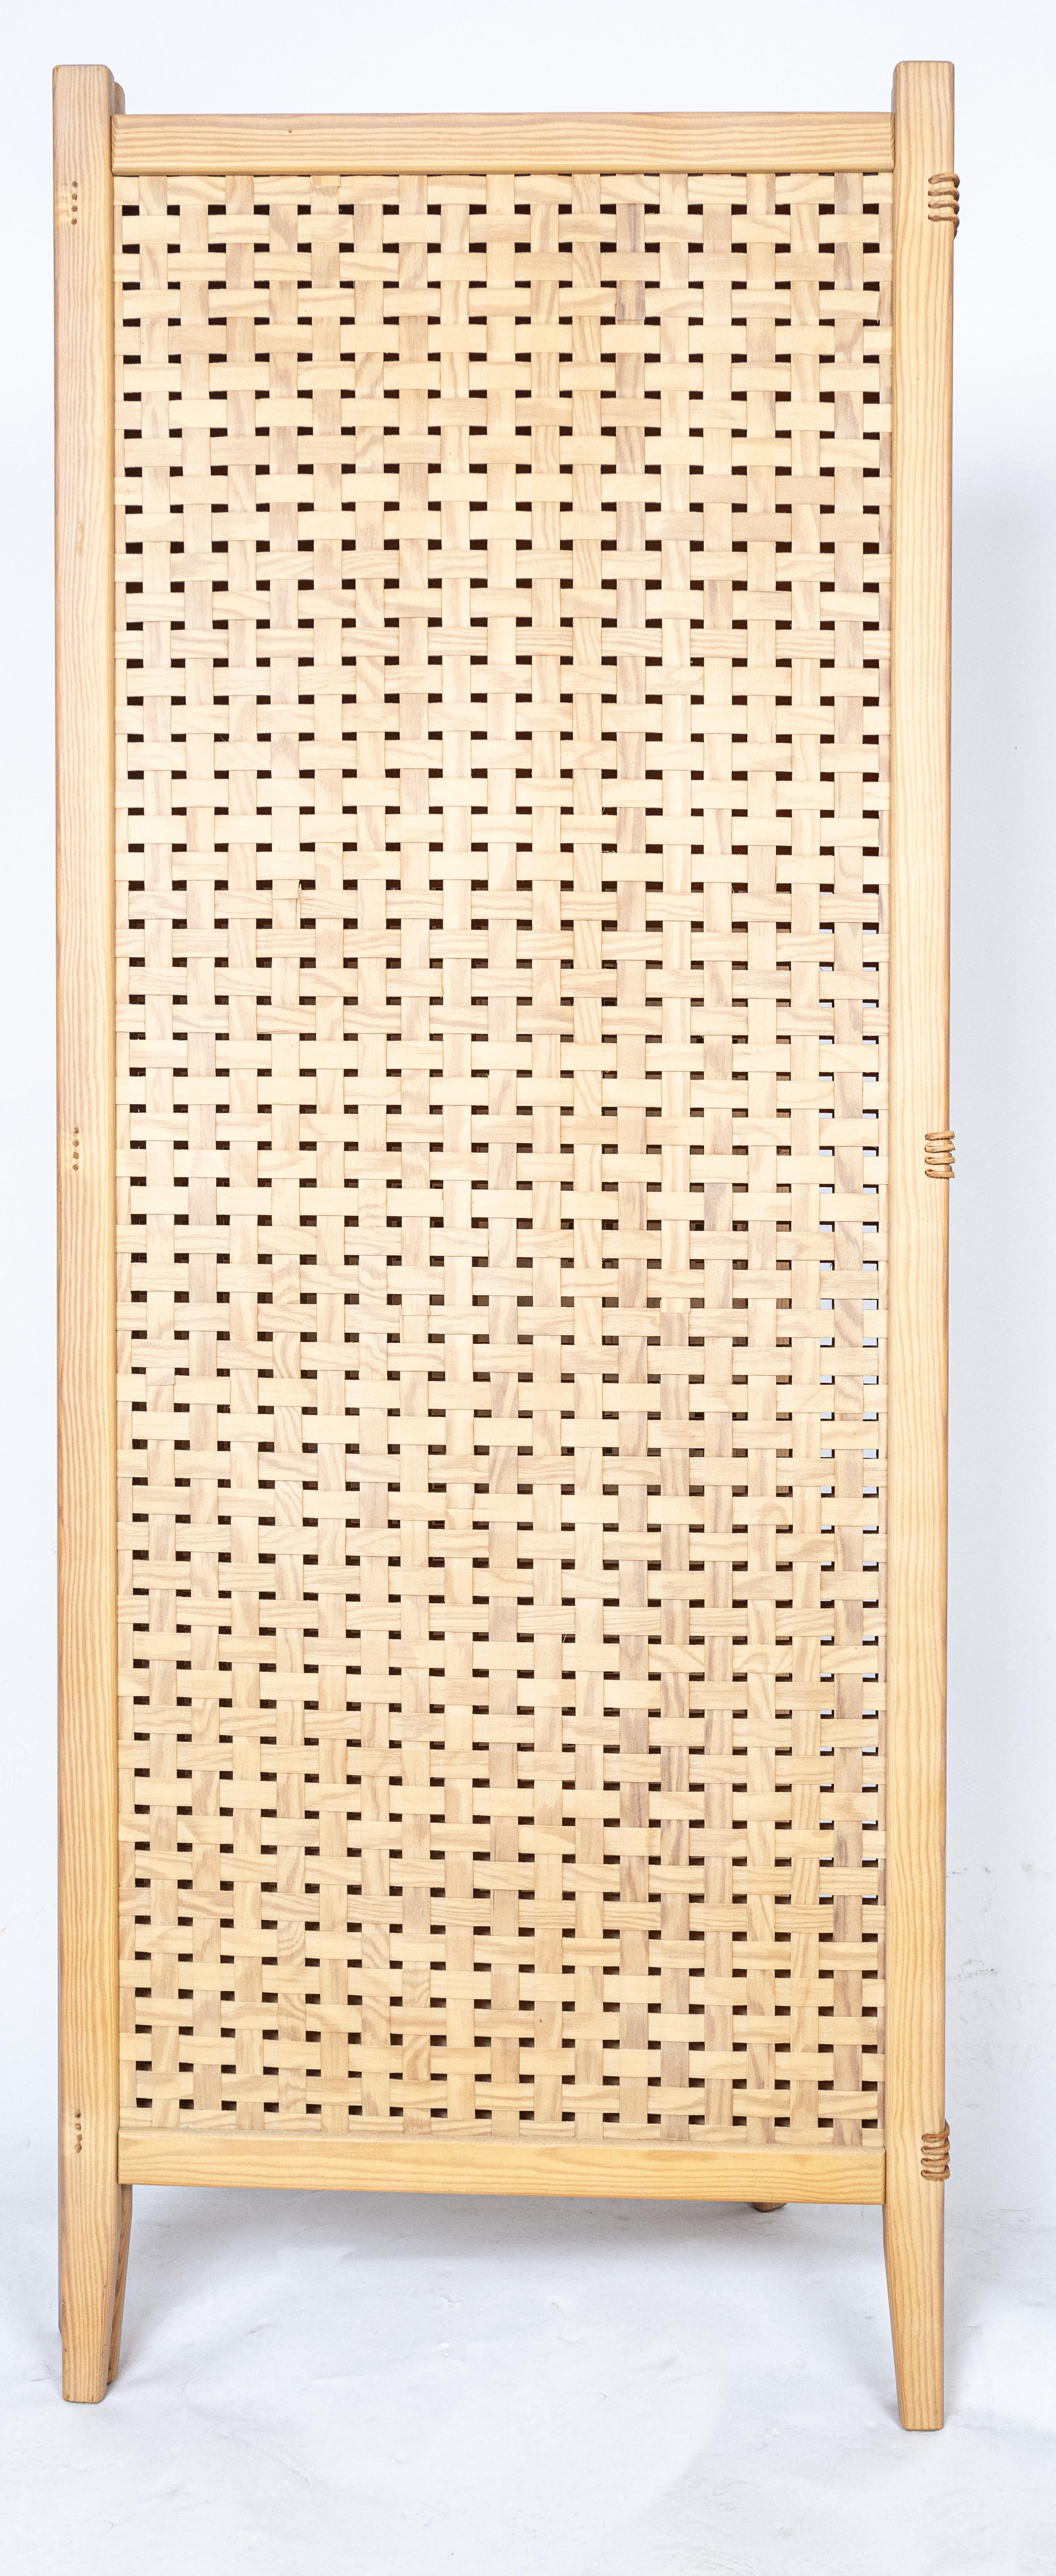 Woven Alberts Tibro ‘Spåna’ Folding Screen Wood and Leather For Sale